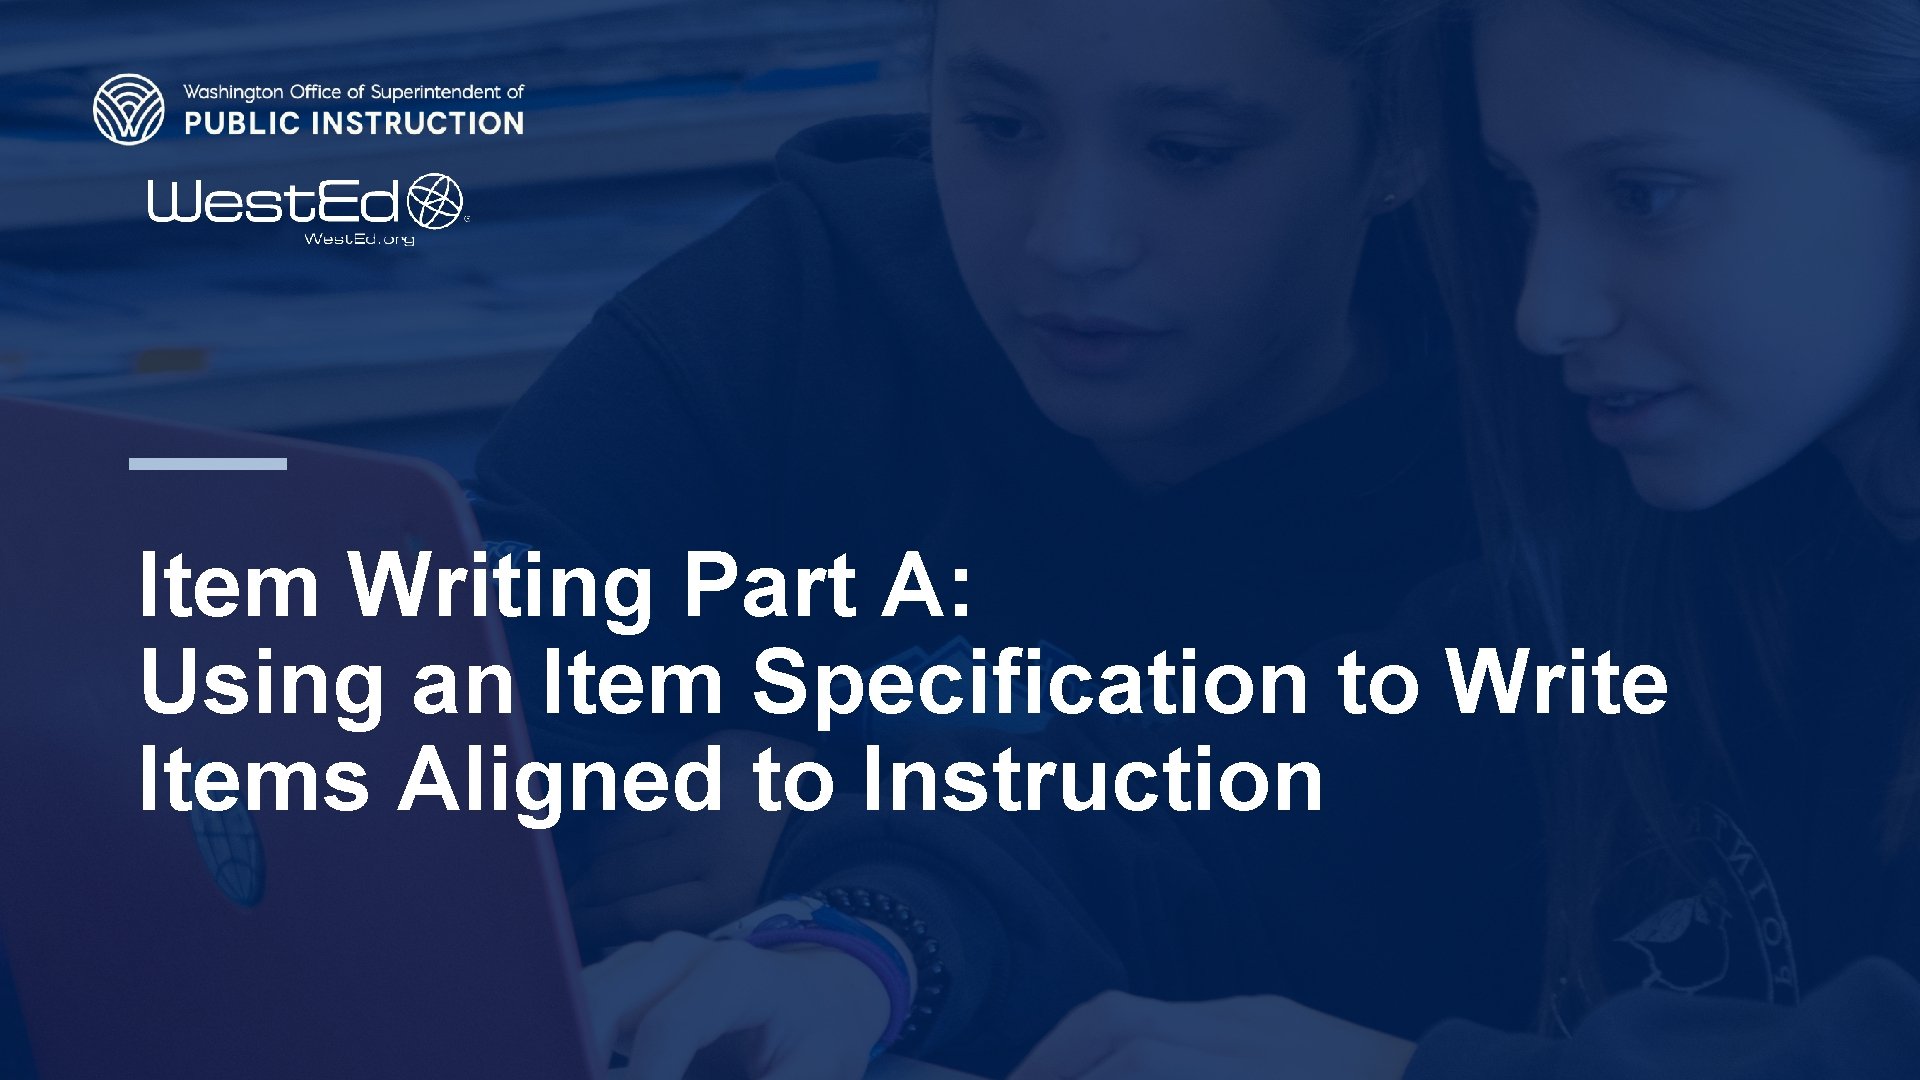 Item Writing Part A: Using an Item Specification to Write Items Aligned to Instruction